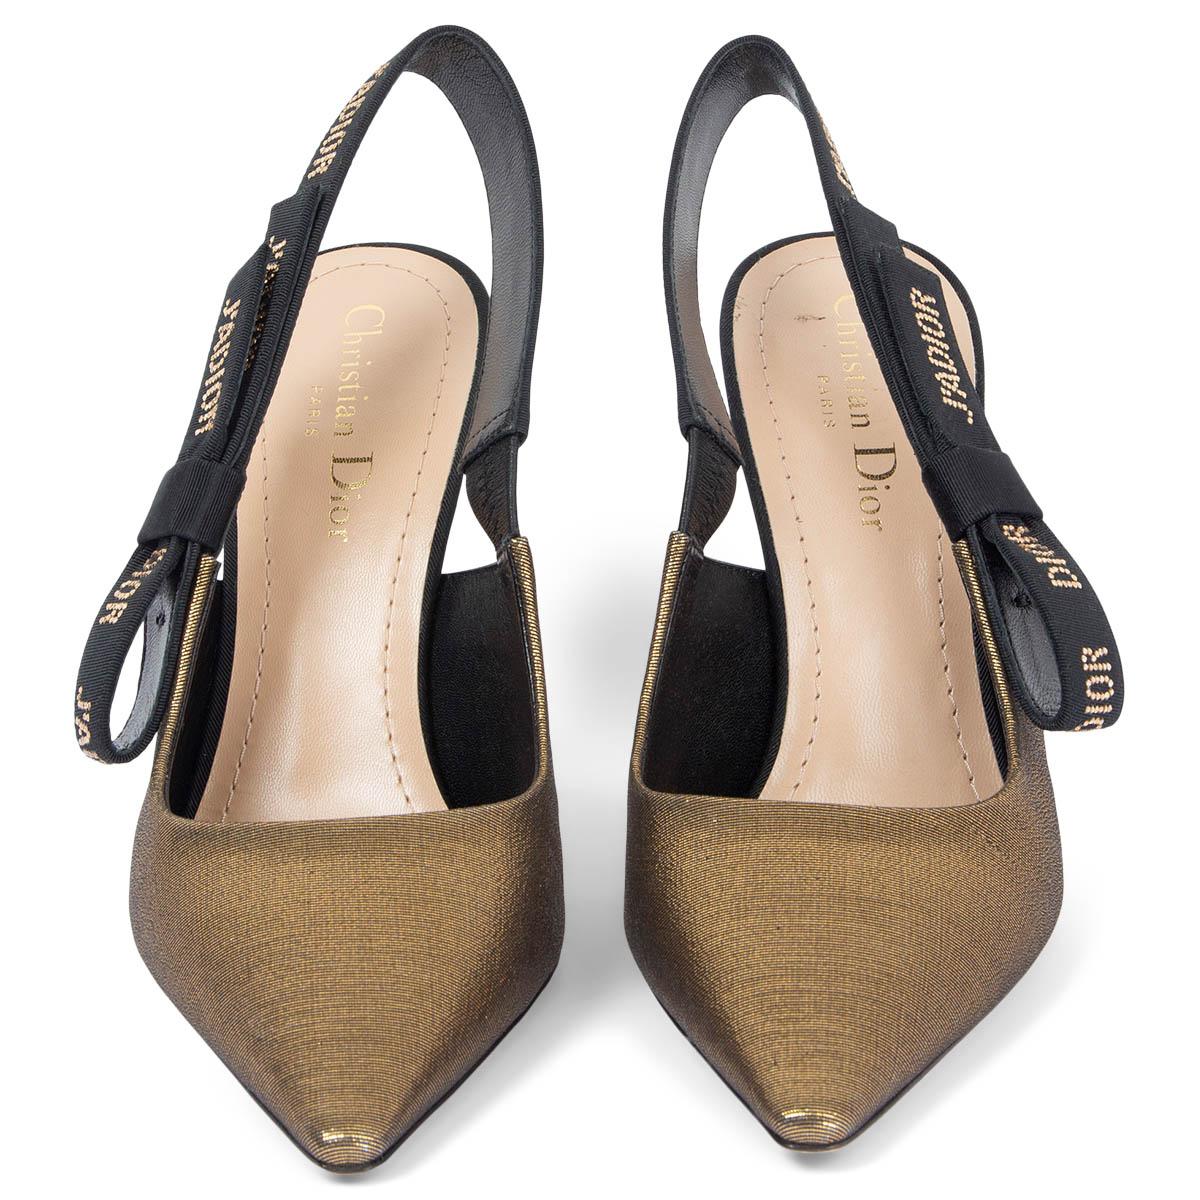 100% authentic Christian Dior JADIOR pumps in metallic bronze grosgrain fabric with black grosgrain comma heel and flat bow ribbon with J'ADIOR rhinestone embellishment. Brand new. Come with dust bag. 

Measurements
Imprinted Size	37.5
Shoe